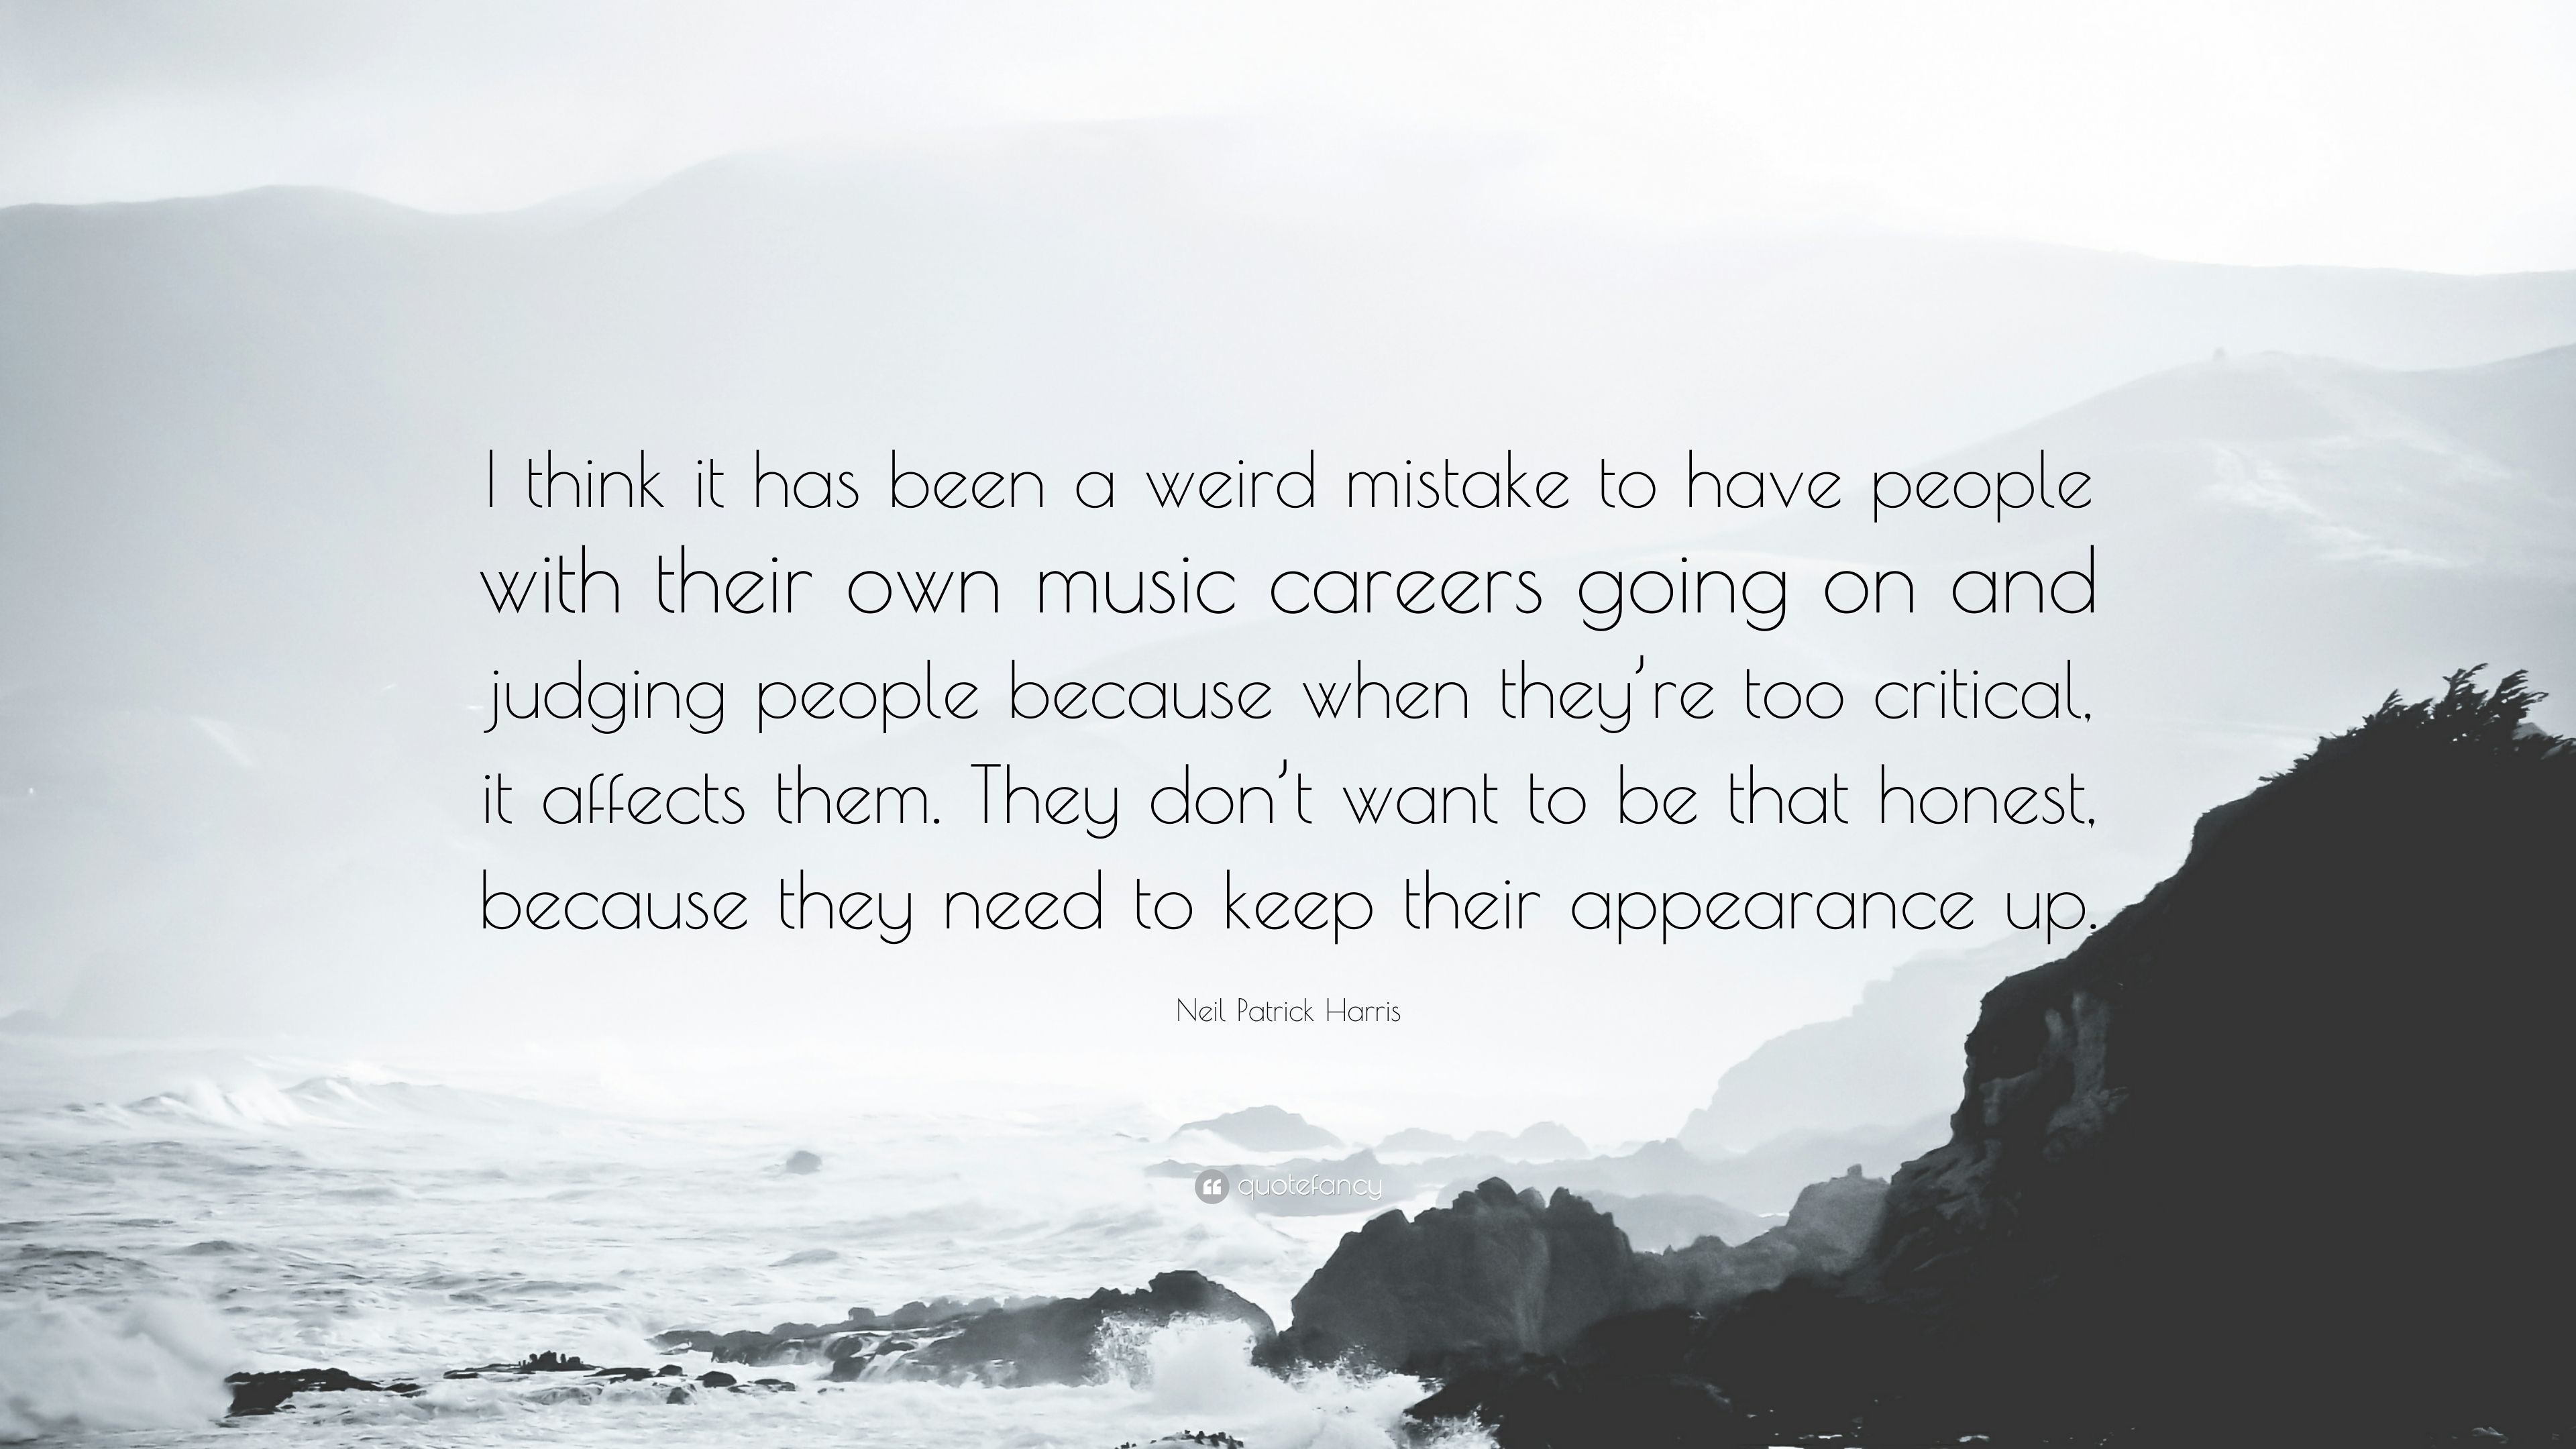 3840x2160 Neil Patrick Harris Quote: “I think it has been a weird mistake to have